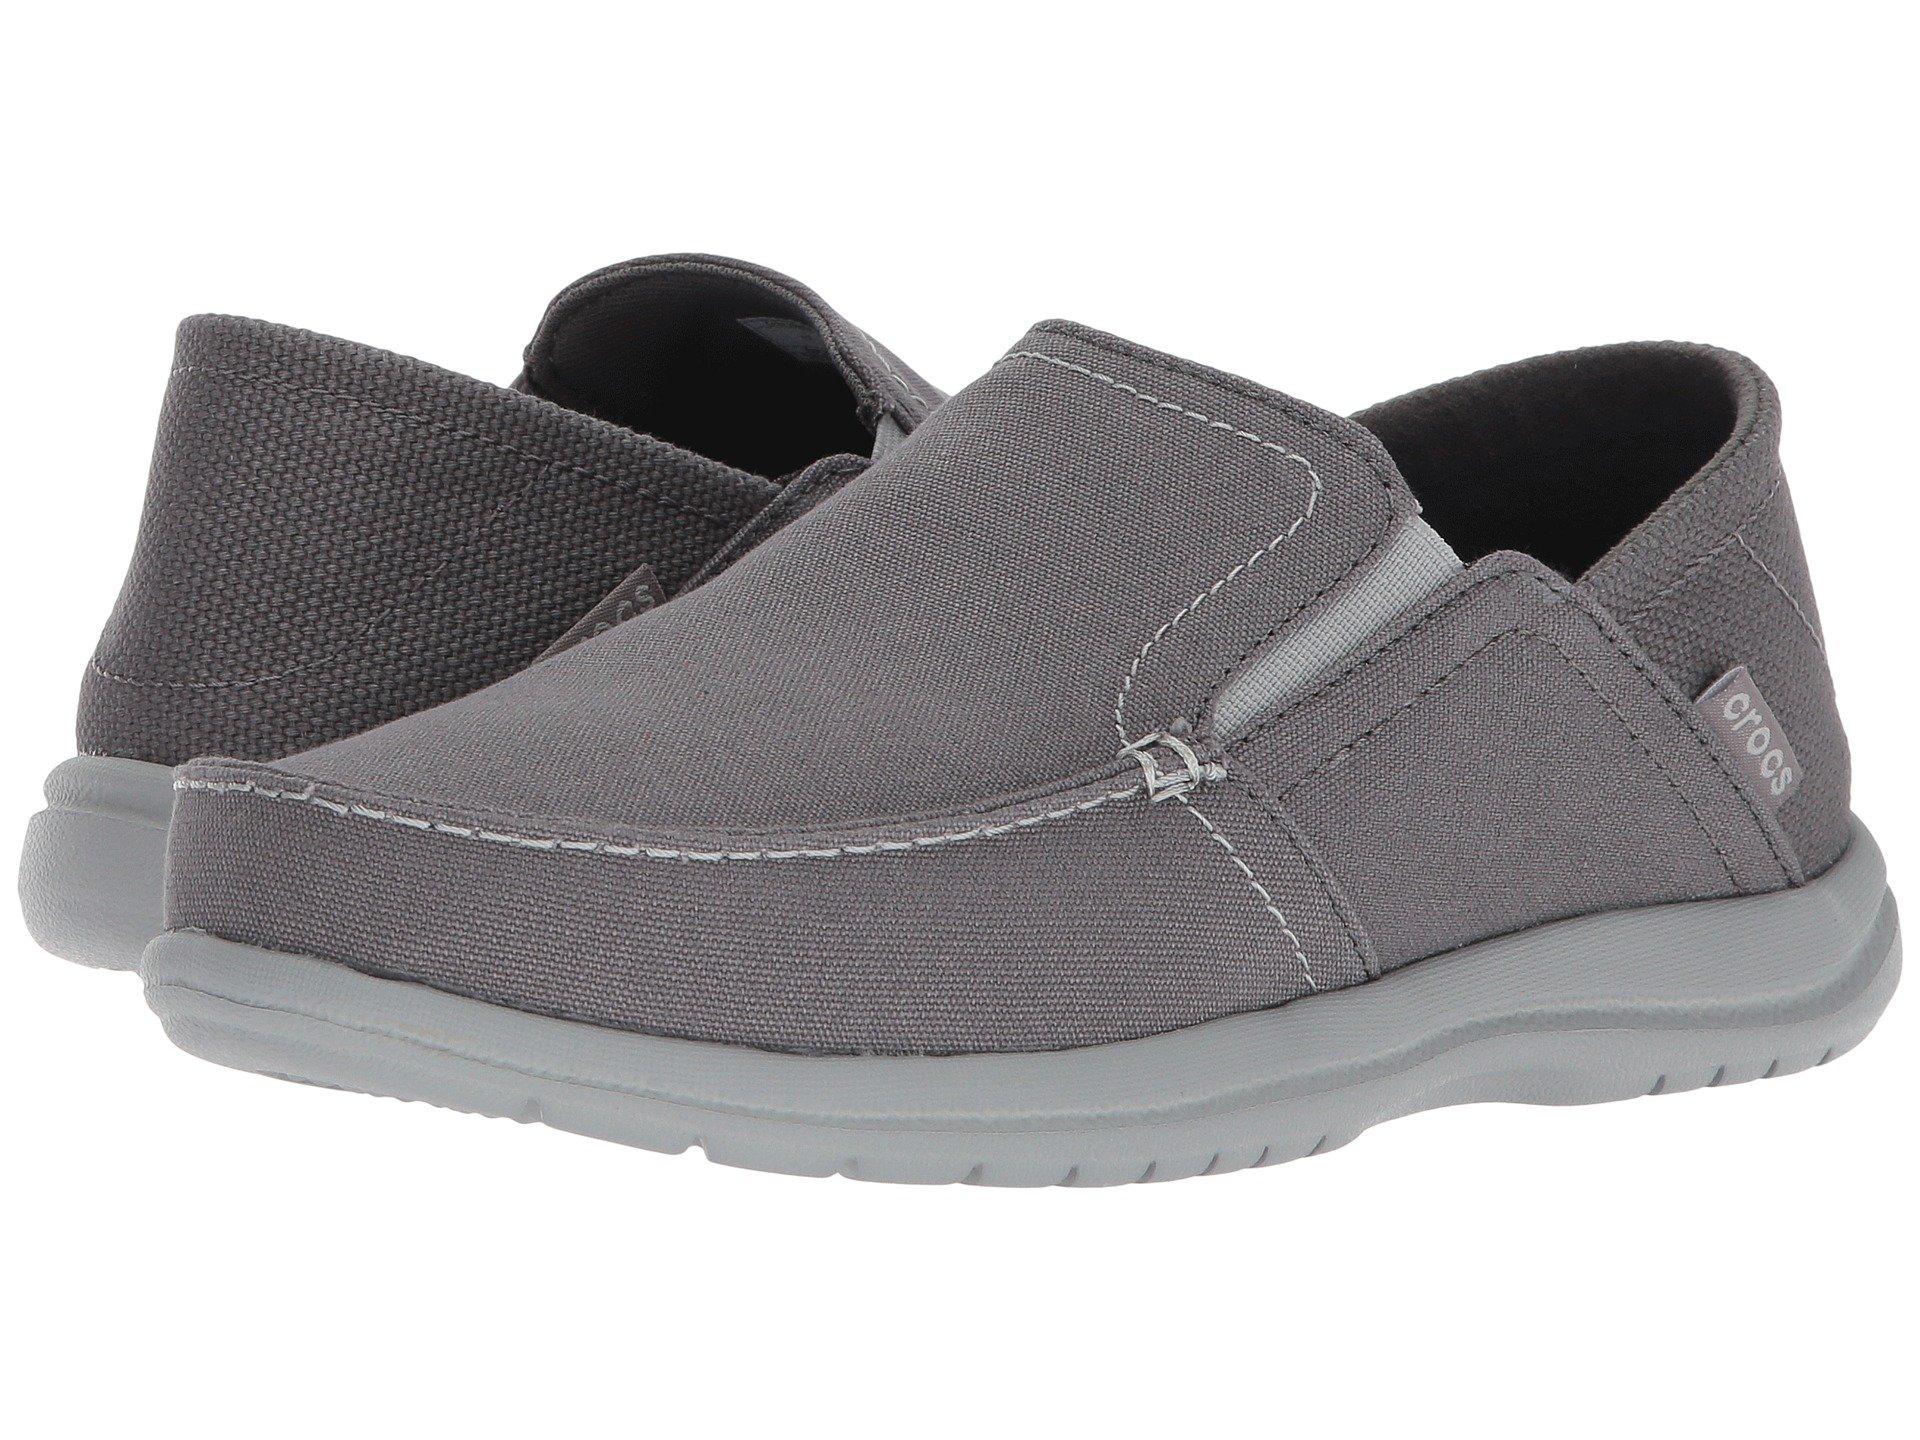 Crocs™ Cotton Santa Cruz Convertible Slip On Loafer Casual Shoes in ...